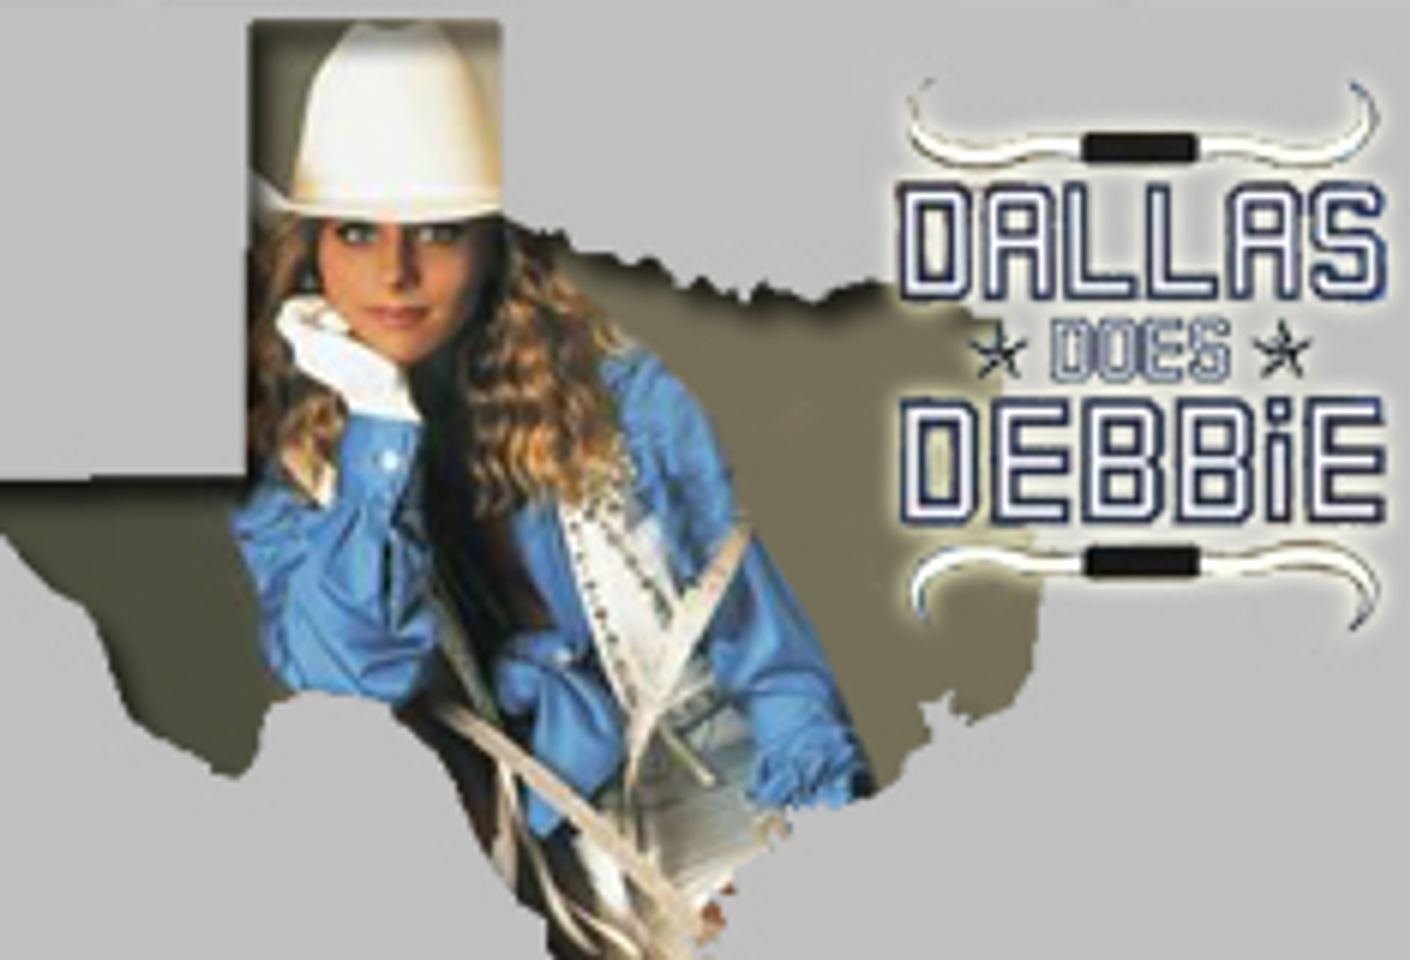 'Dallas Does Debbie' Does Adult Stores This Week